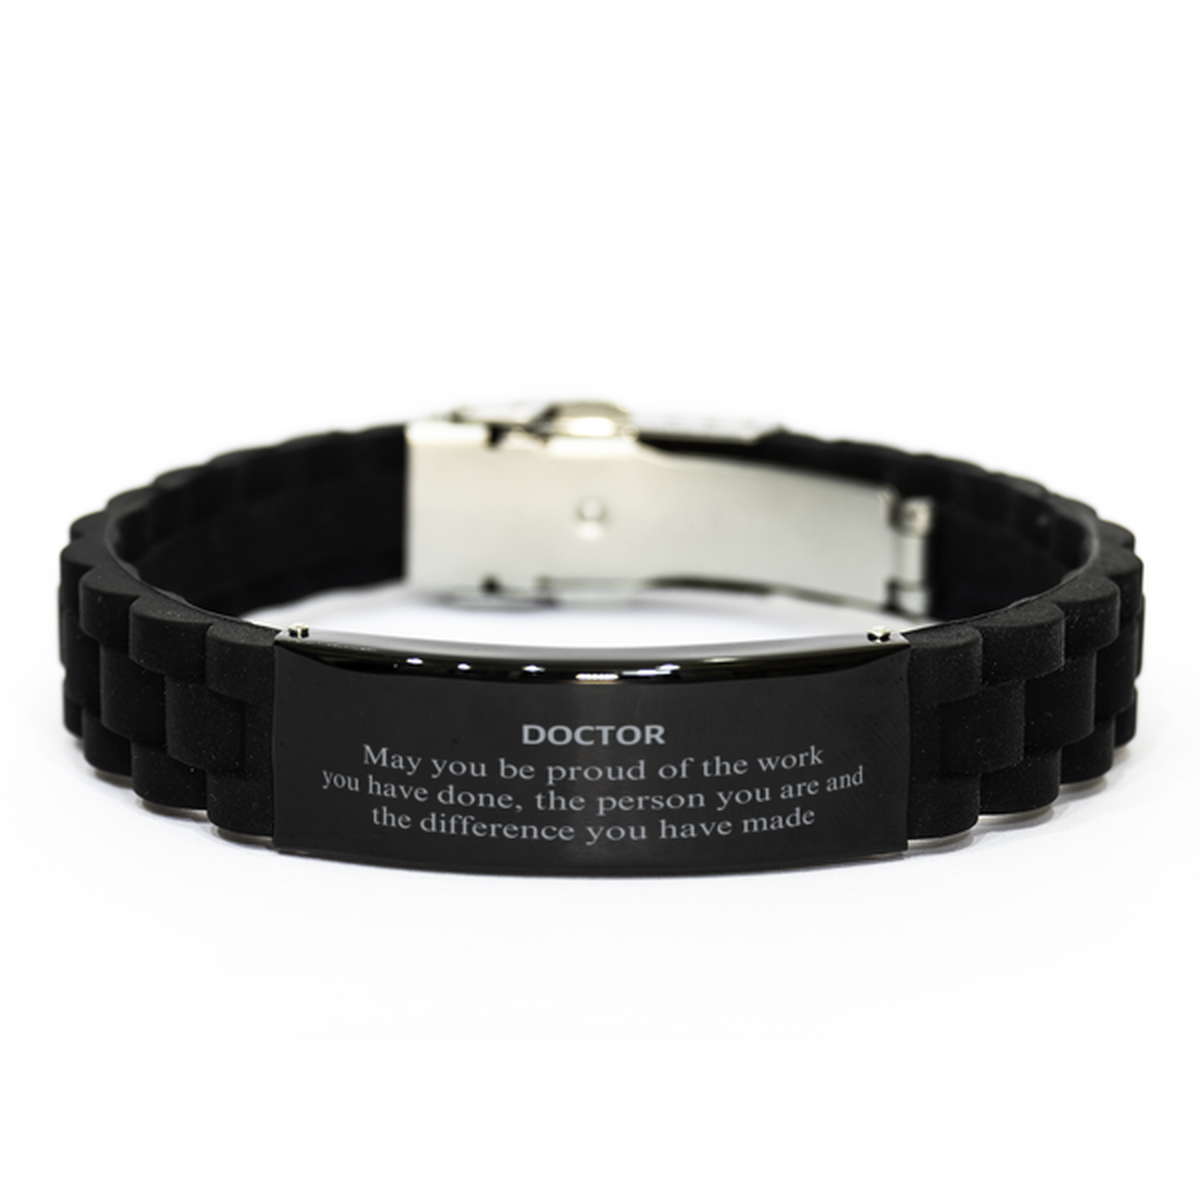 Doctor May you be proud of the work you have done, Retirement Doctor Black Glidelock Clasp Bracelet for Colleague Appreciation Gifts Amazing for Doctor